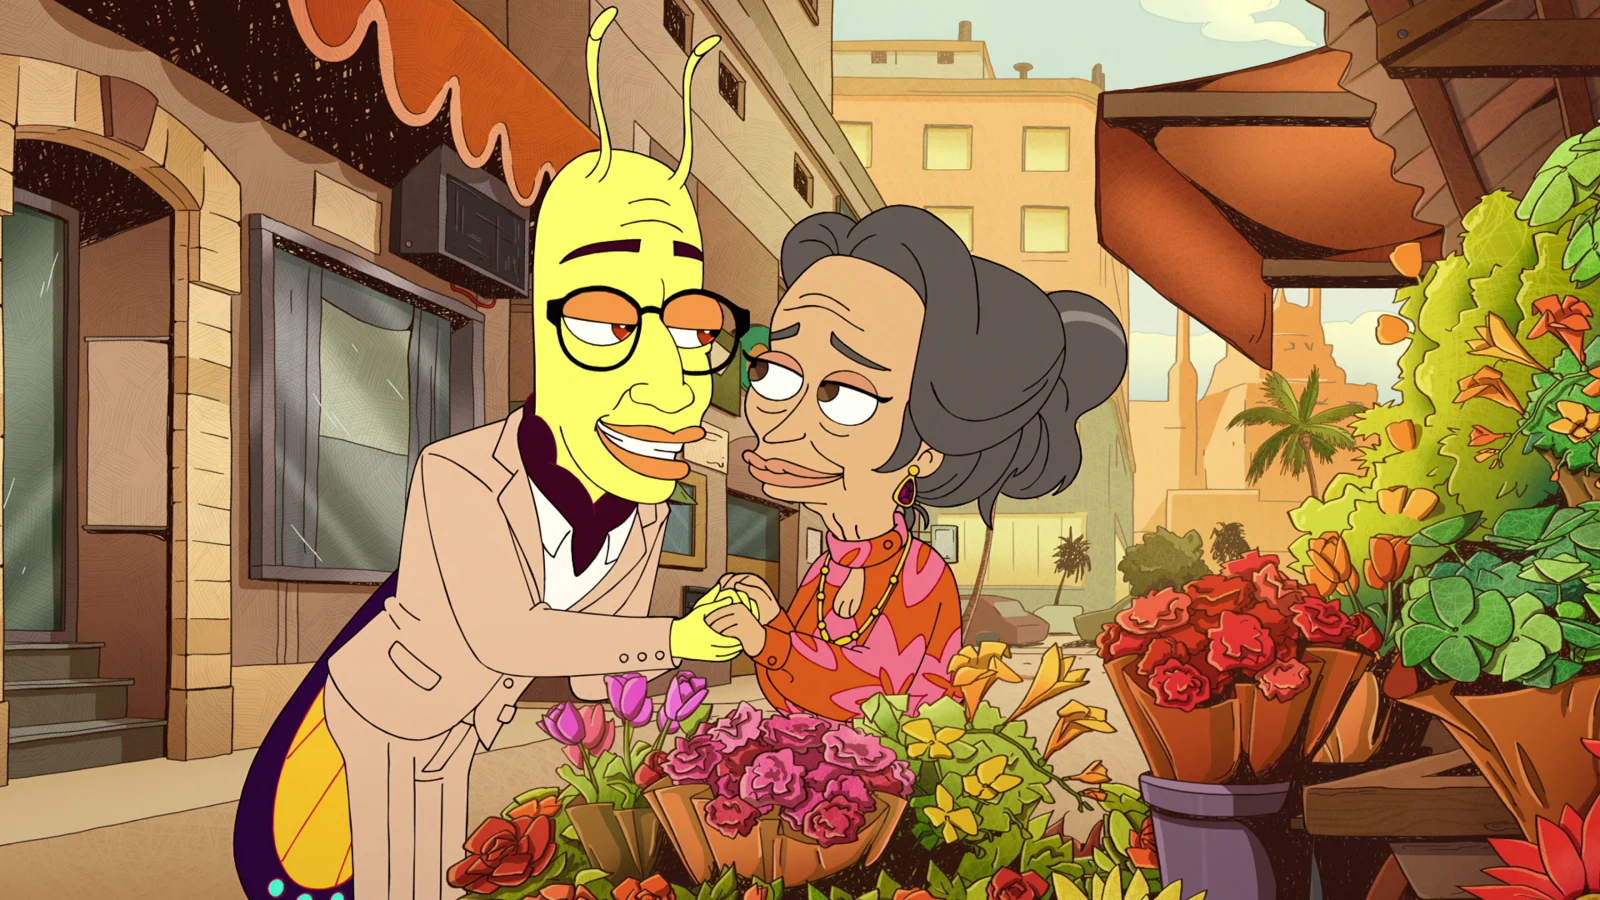 Yellow cartoon grasshopper in a beige suit and black eyeglasses holding the hands of an elderly woman, also a cartoon. They gaze lovingly into one another's eyes.